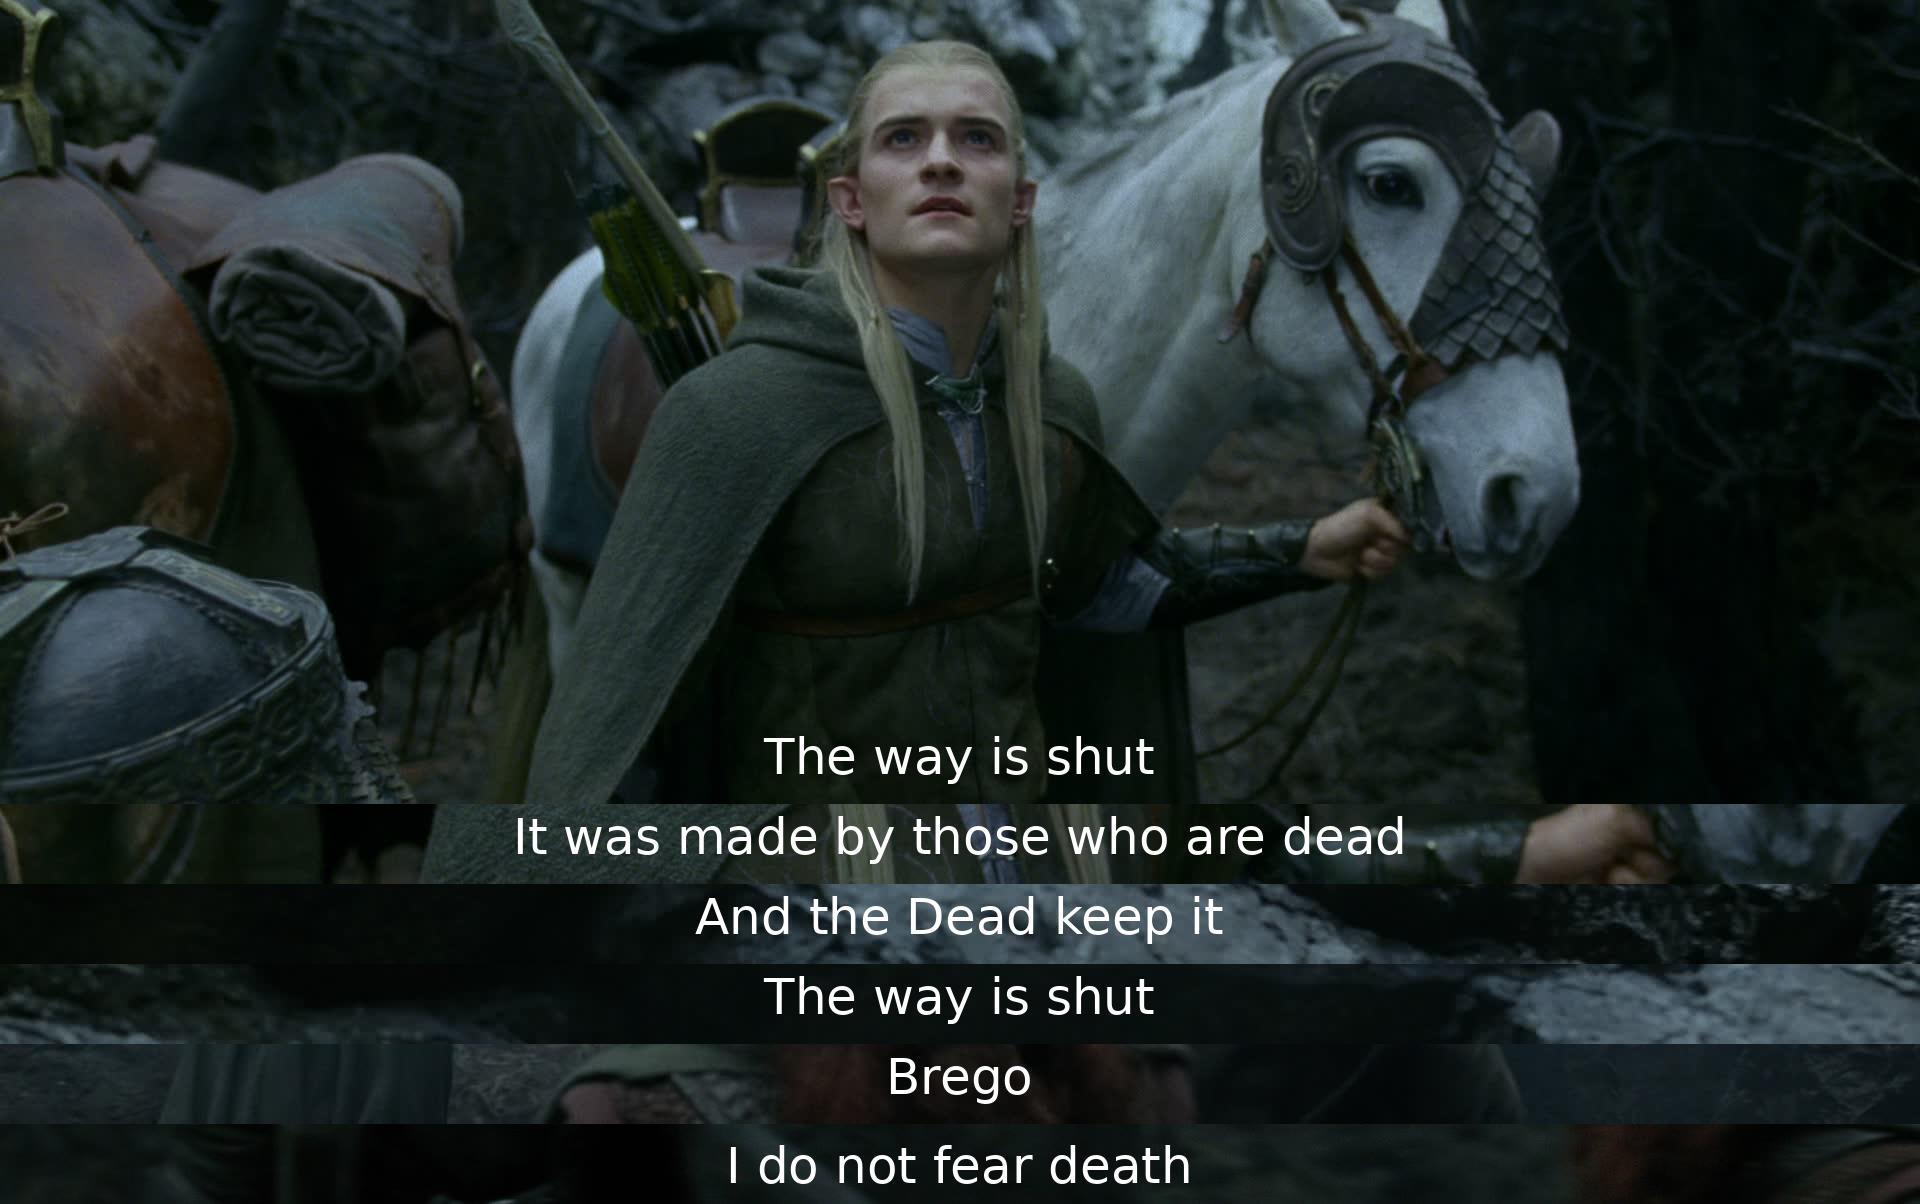 A character named Brego encounters a blocked path kept by the dead. Unfearful of death, Brego acknowledges the closure of the way by the deceased and accepts the challenge ahead.